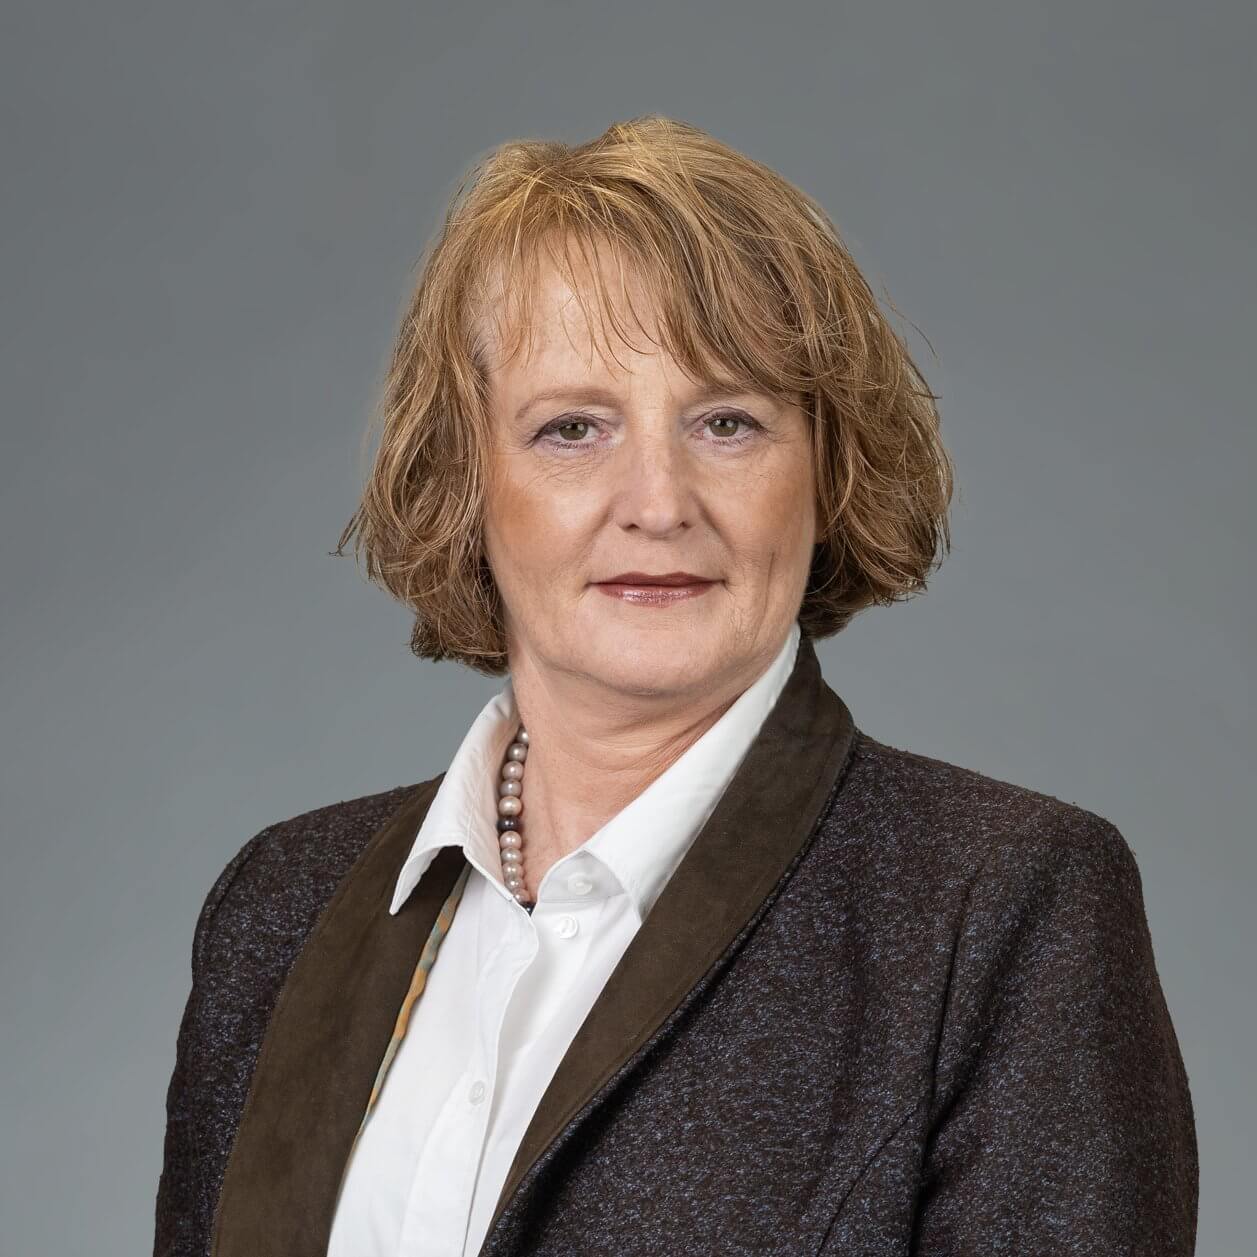 Dr. Ilva Bönicke | Head of Quality, Safety, Health & Environment